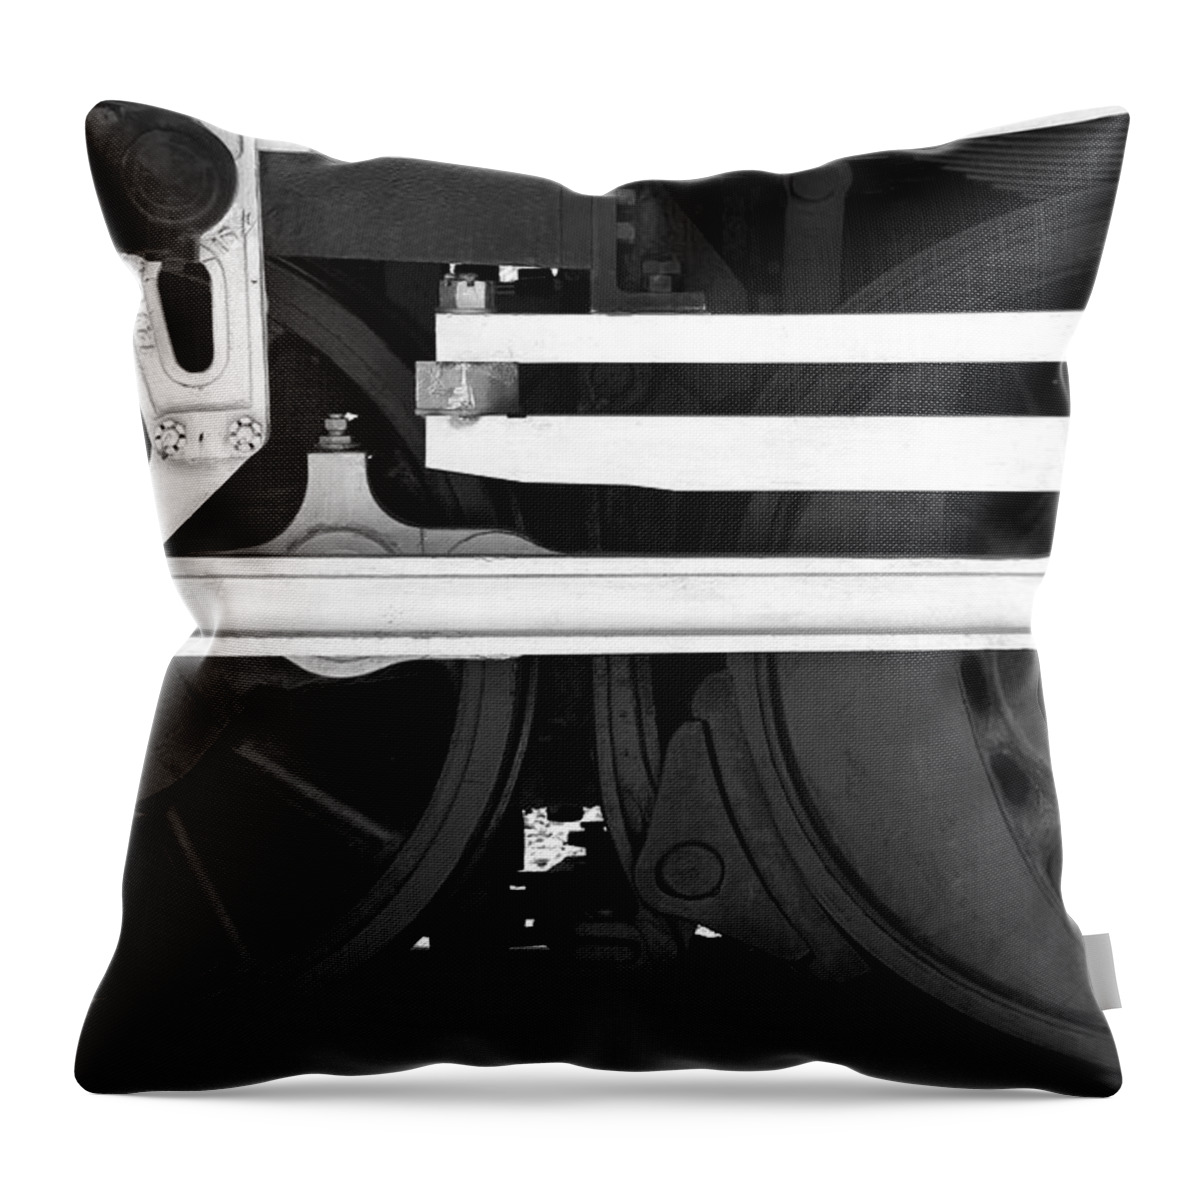 Drive Train Throw Pillow featuring the photograph Drive Train by Mike McGlothlen